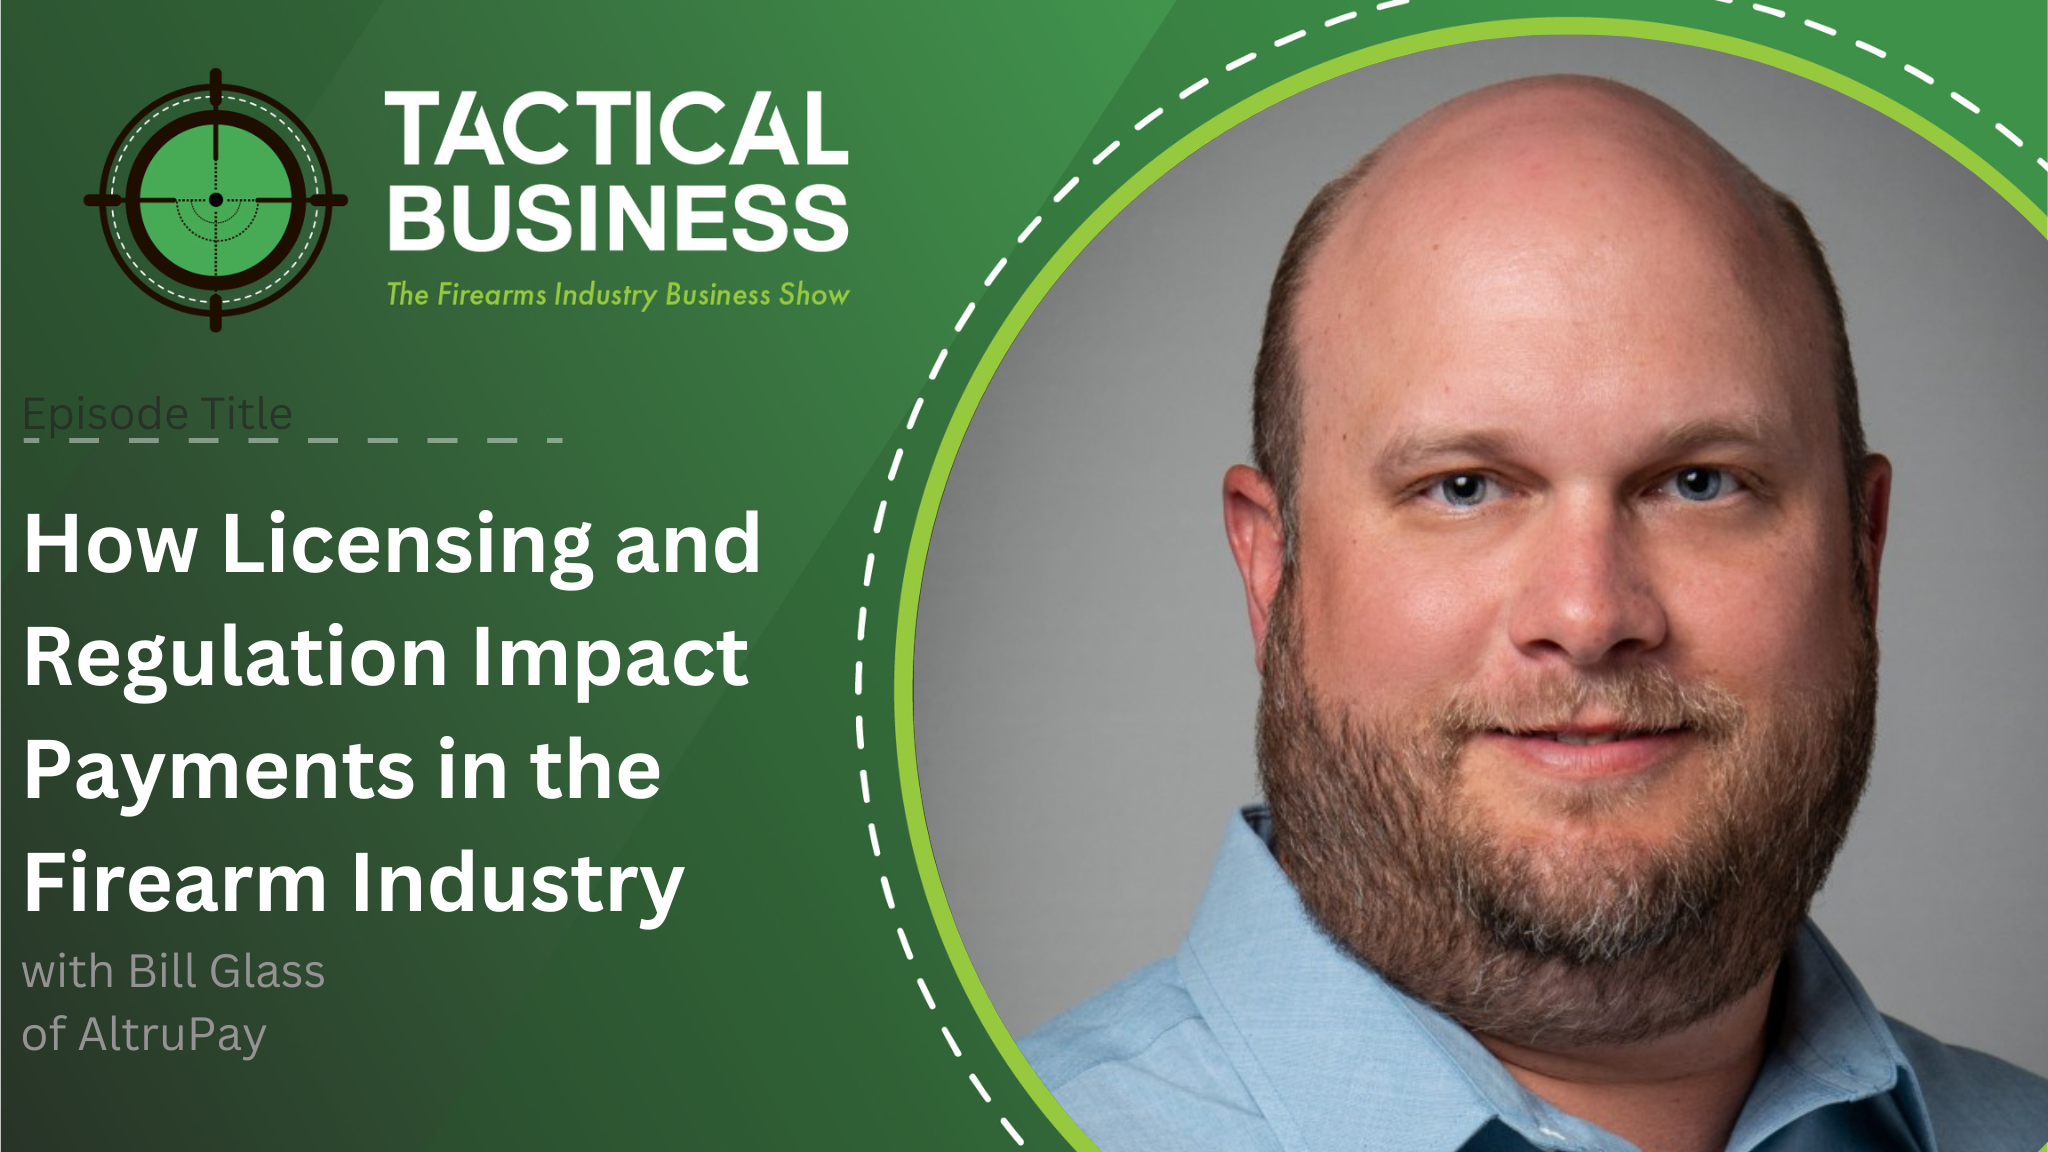 How Licensing and Regulation Impact Payments in the Firearm Industry with Bill Glass of AltruPay